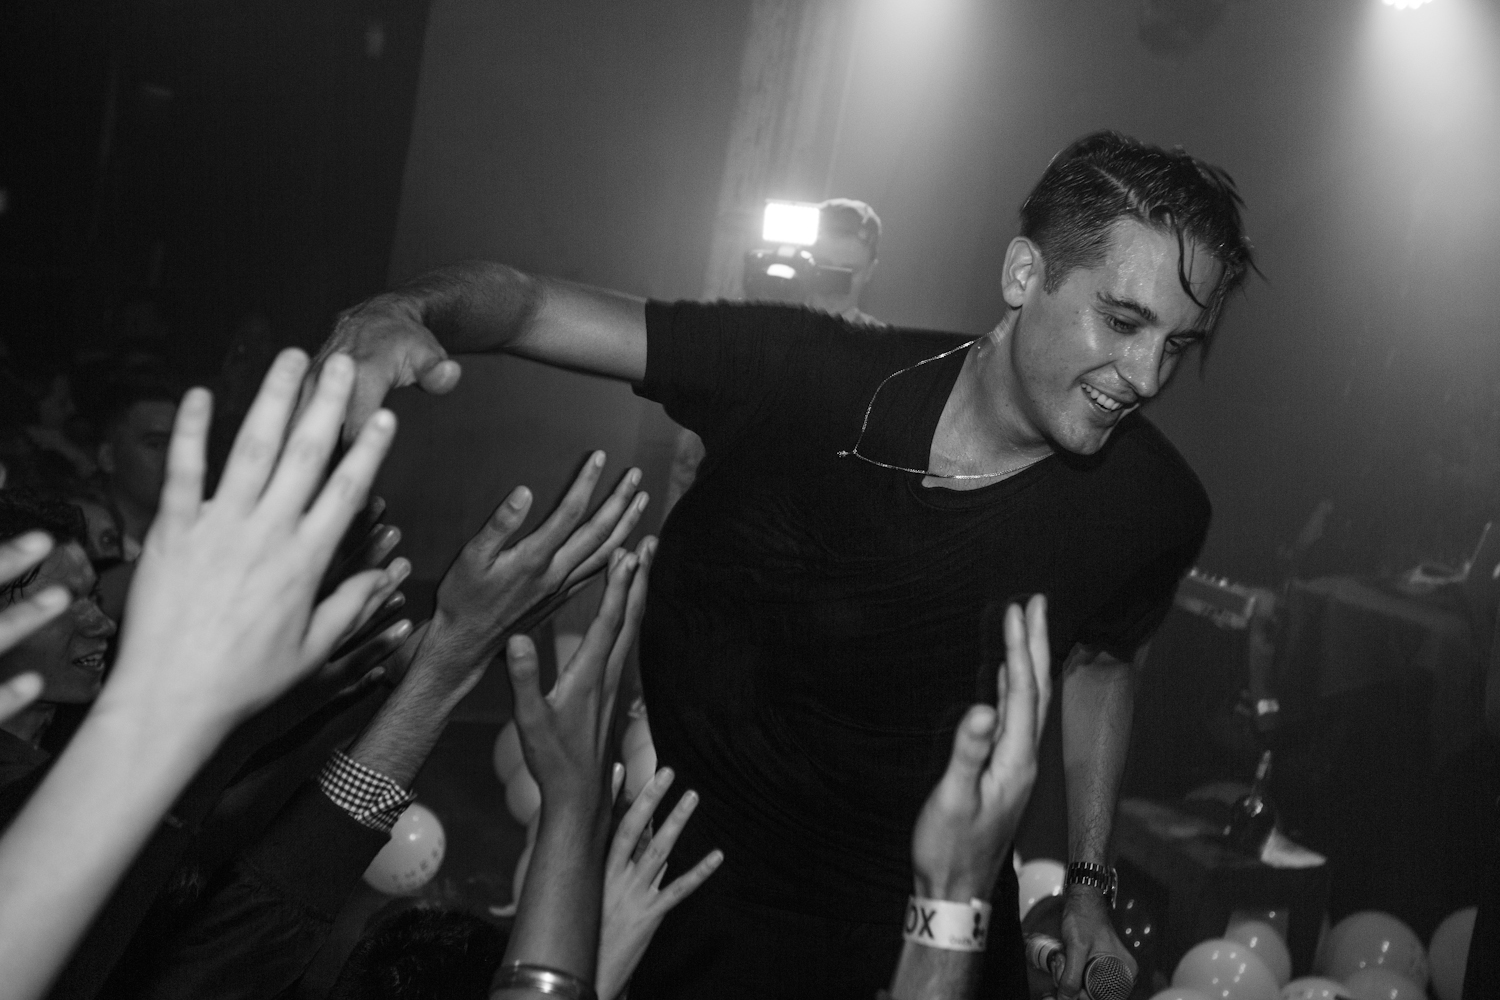 G-Eazy photo 406 of 912 pics, wallpaper - photo #1155869 - ThePlace2.